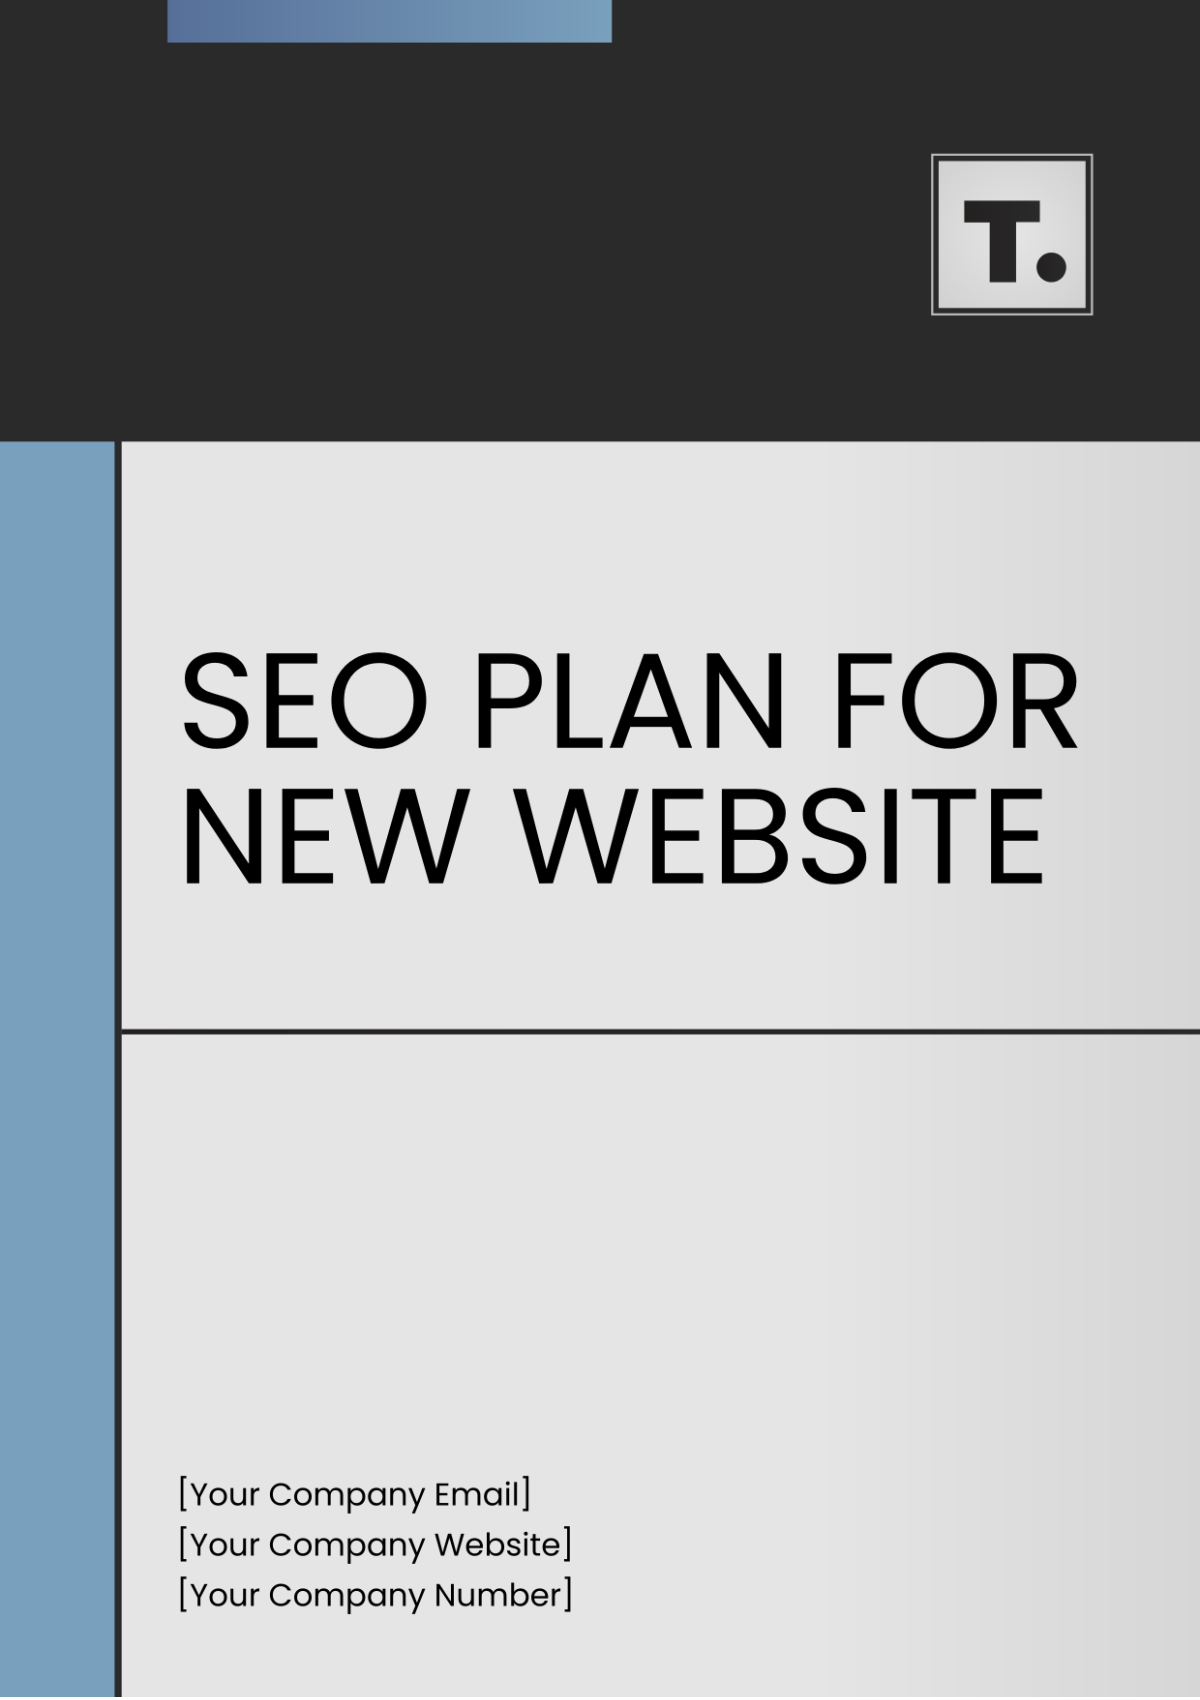 Free SEO Plan for New Website Template